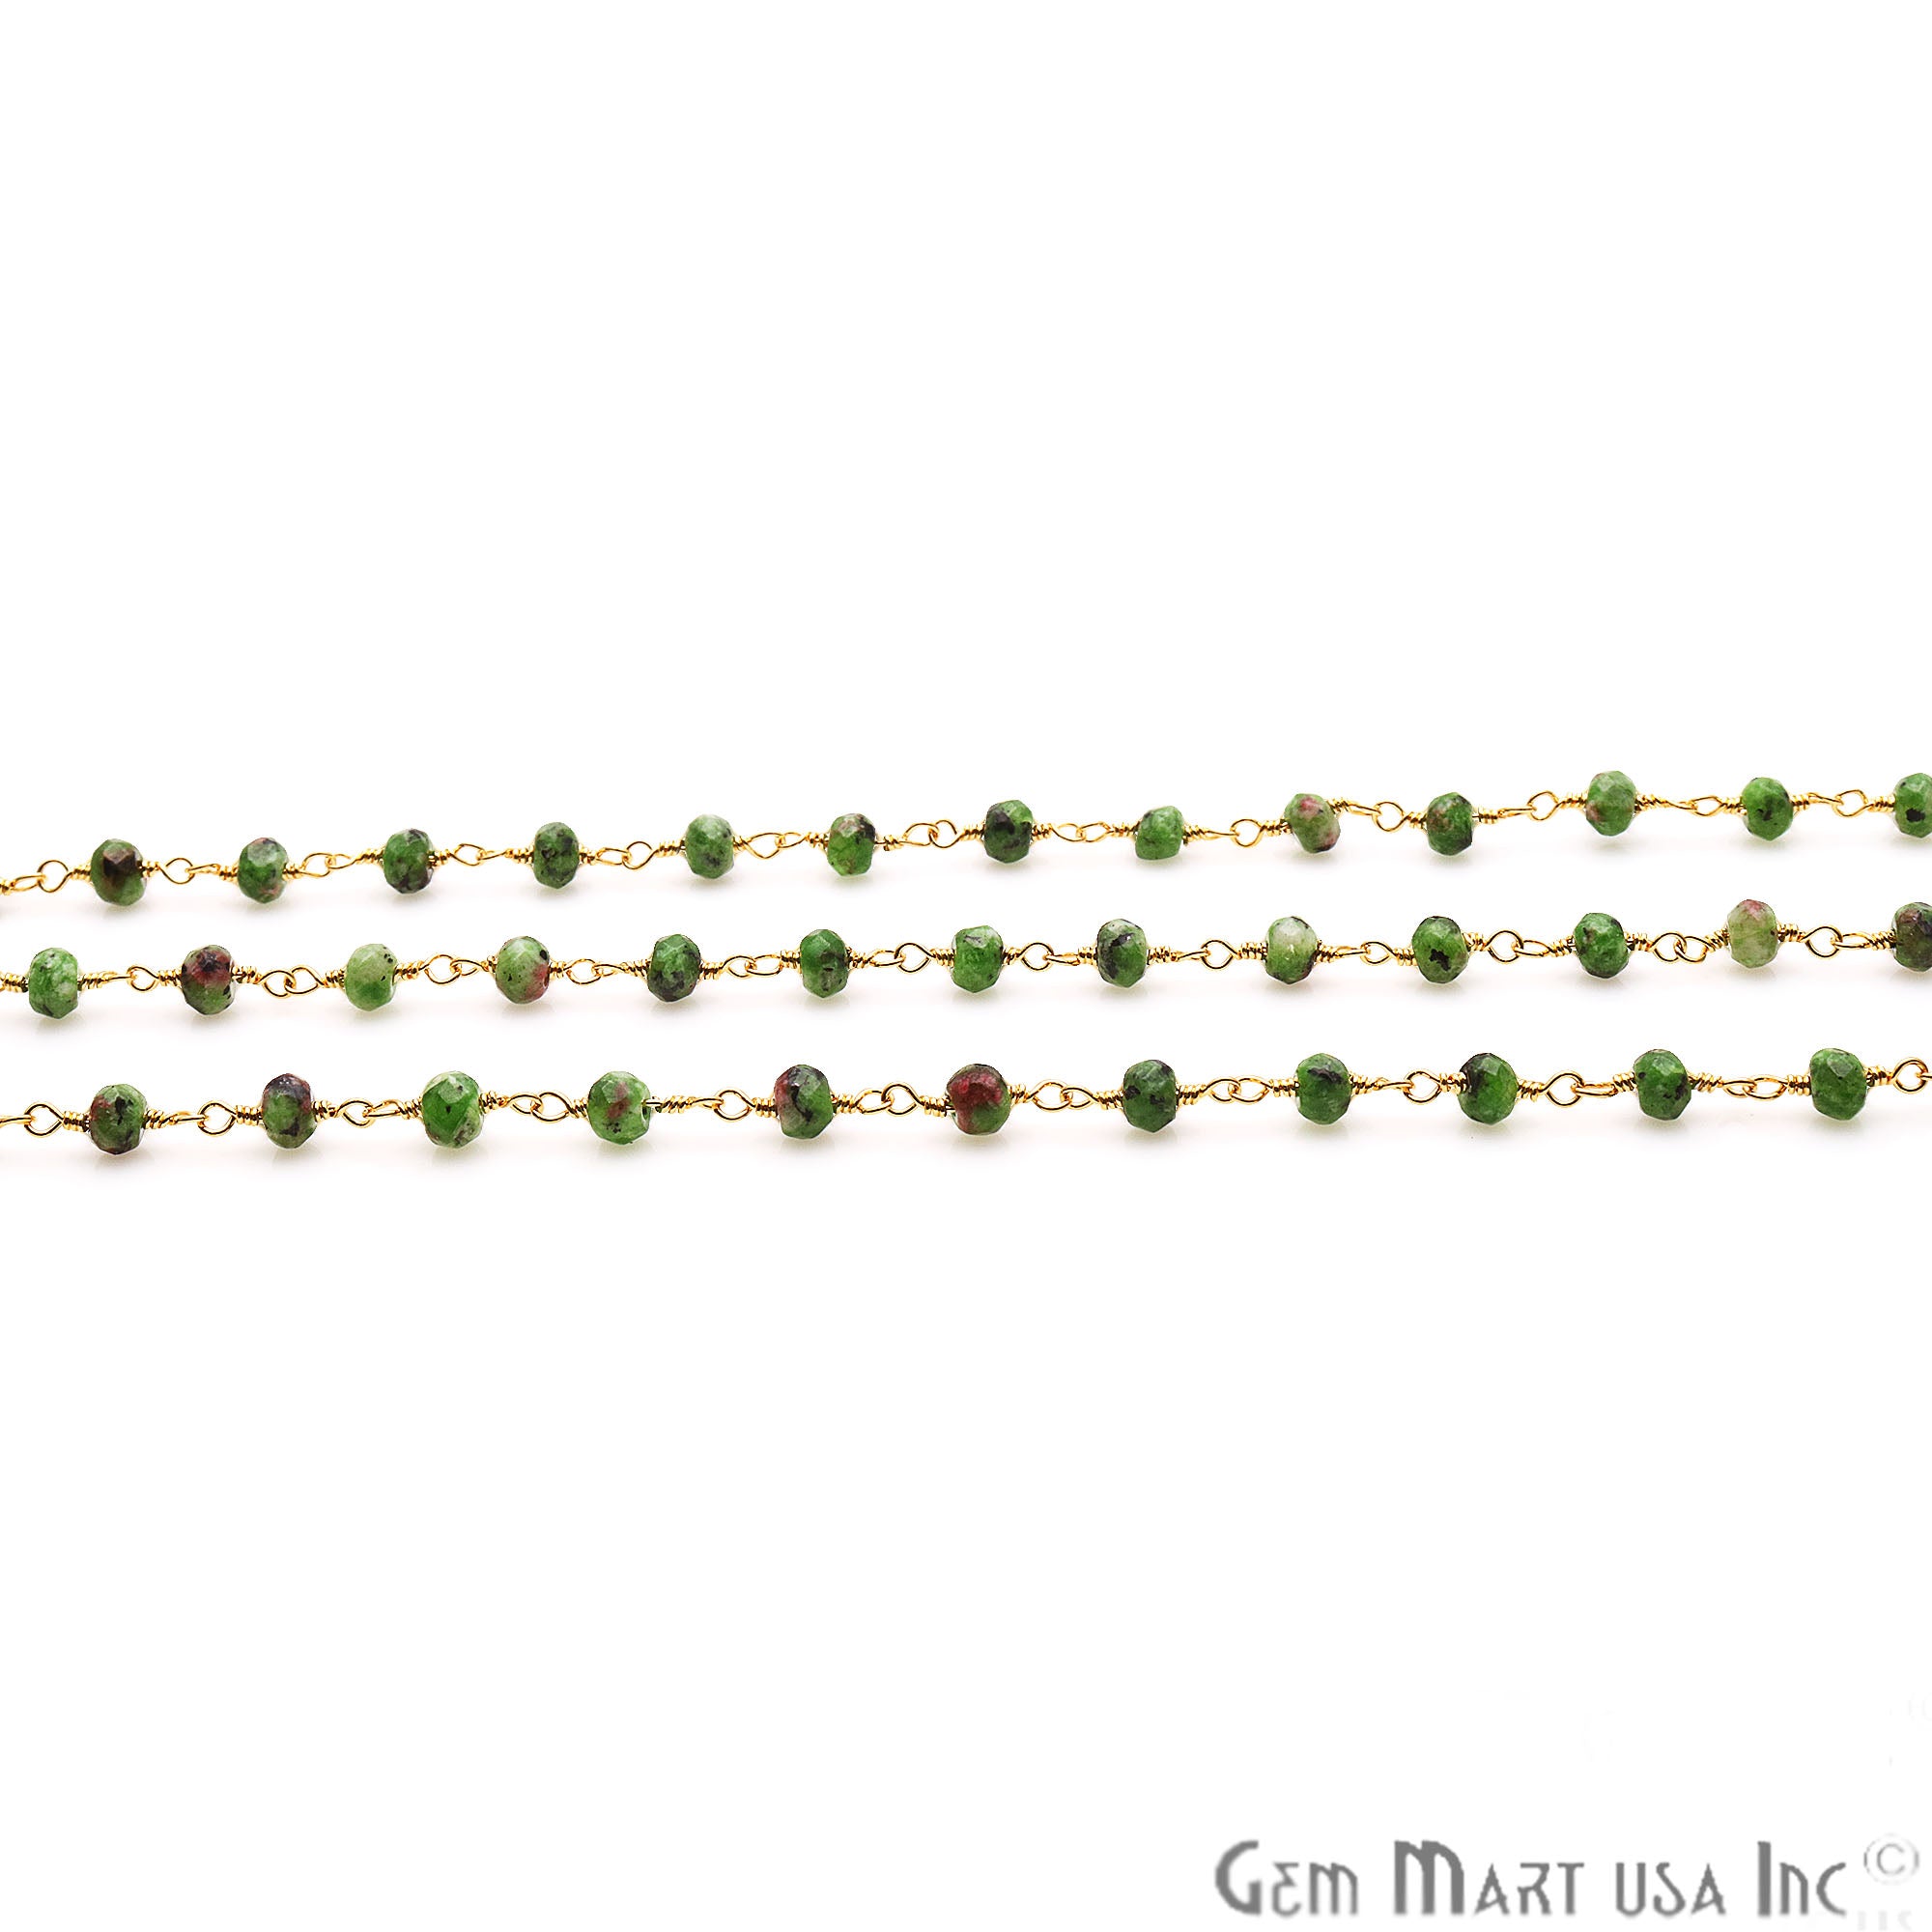 Ruby Zoisite Jade Faceted Beads 4mm Gold Plated Wire Wrapped Rosary Chain - GemMartUSA